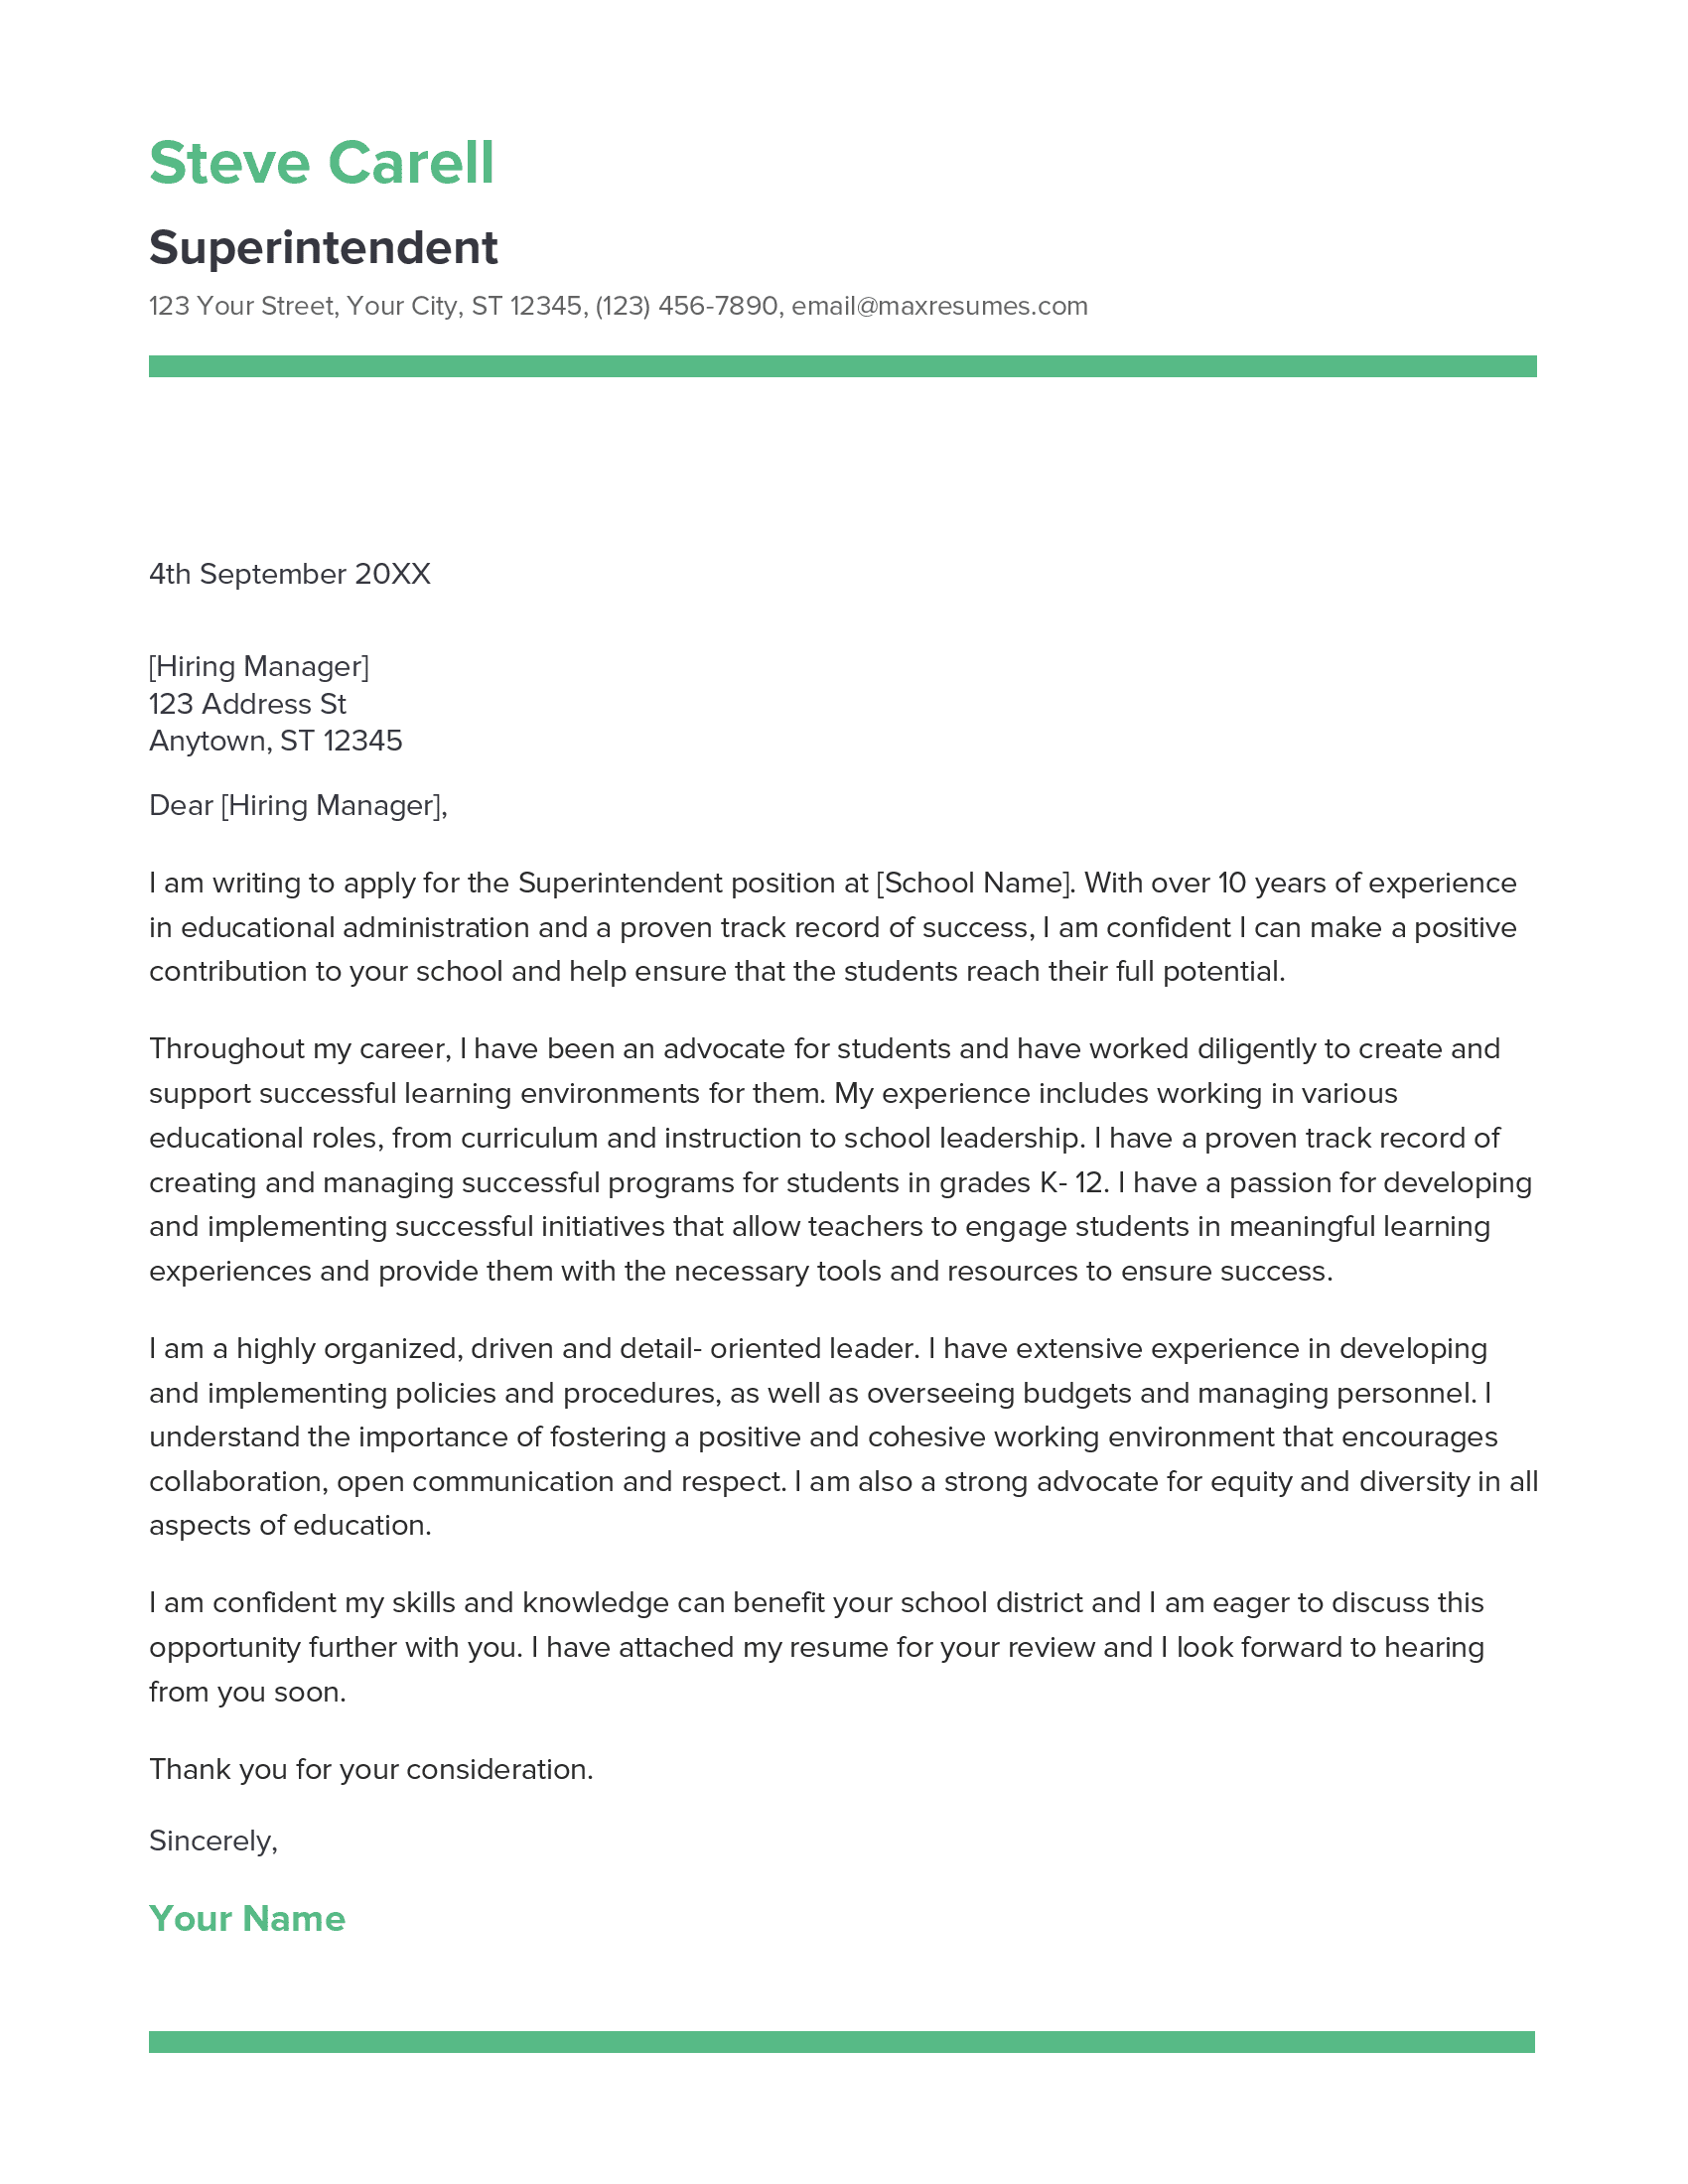 Superintendent Cover Letter Example